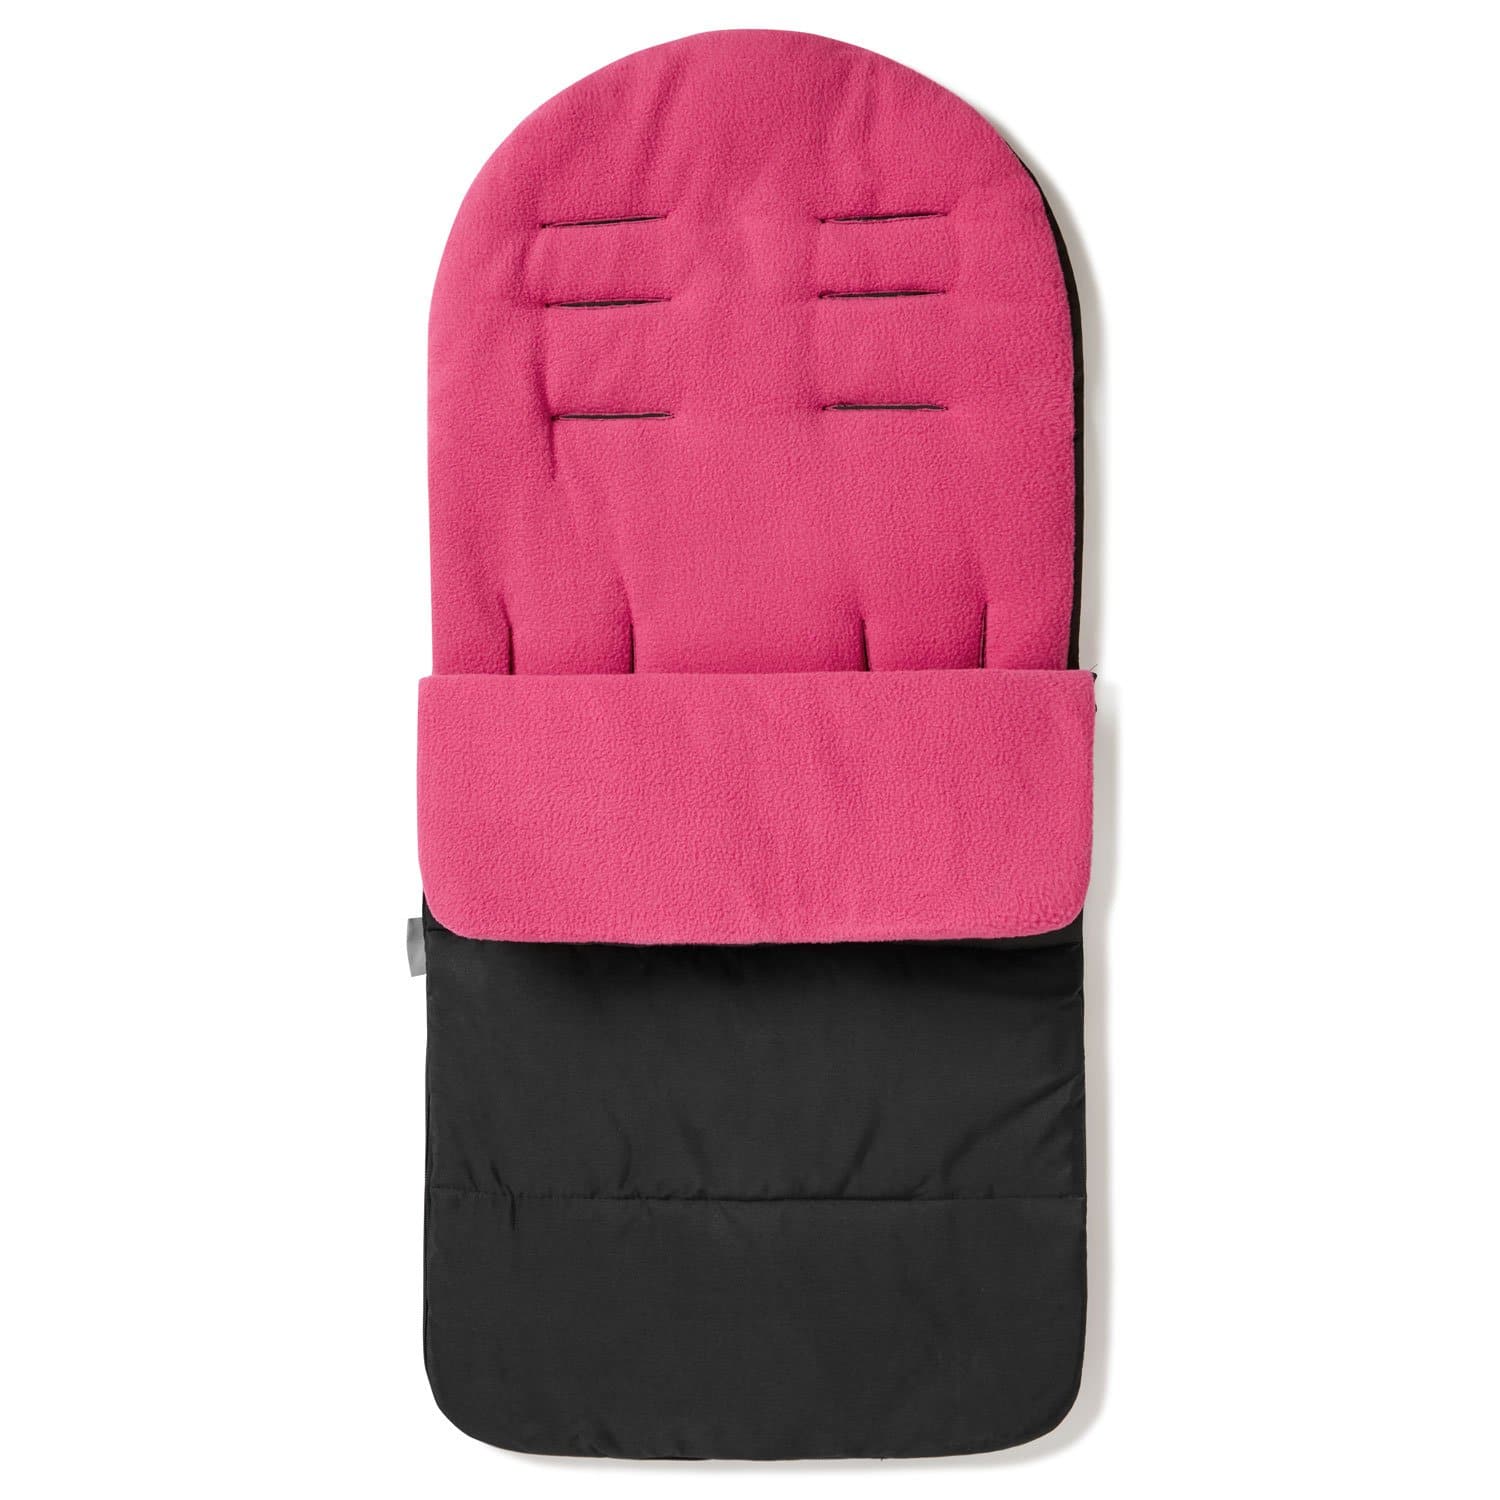 Premium Footmuff / Cosy Toes Compatible with BabyDan - For Your Little One